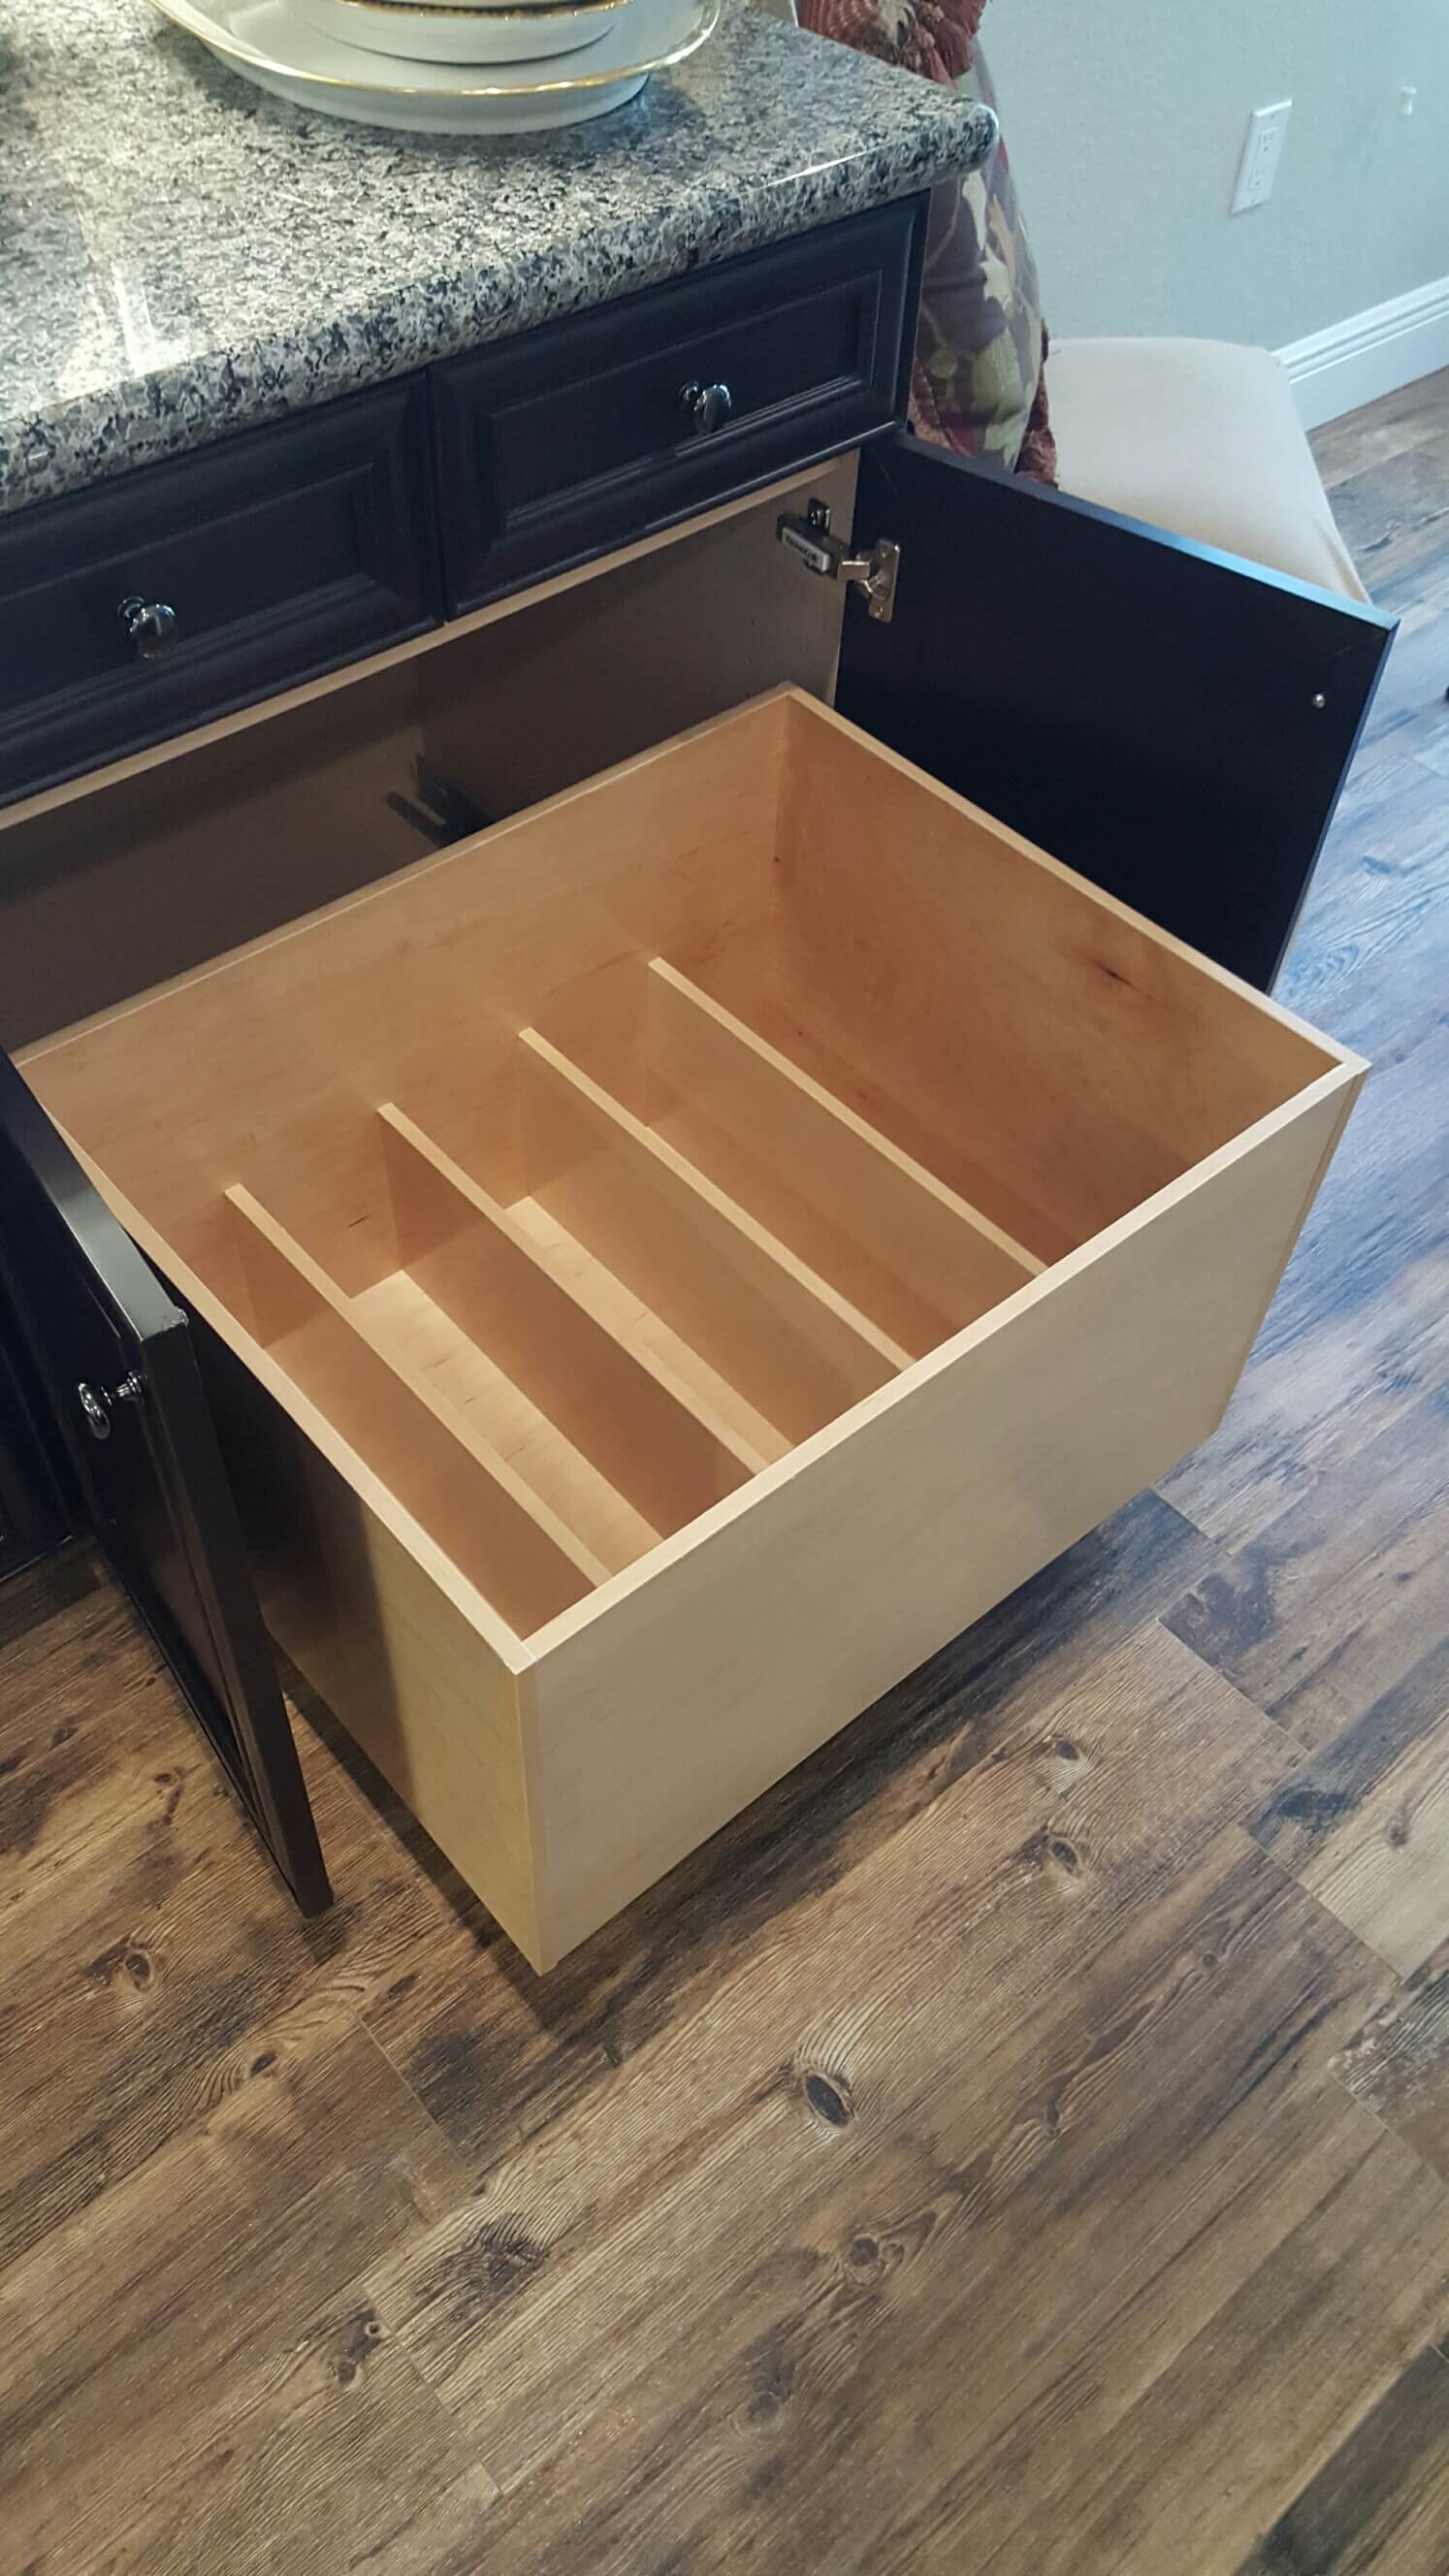 3 Reasons You Should Get Custom Pull Out Drawers